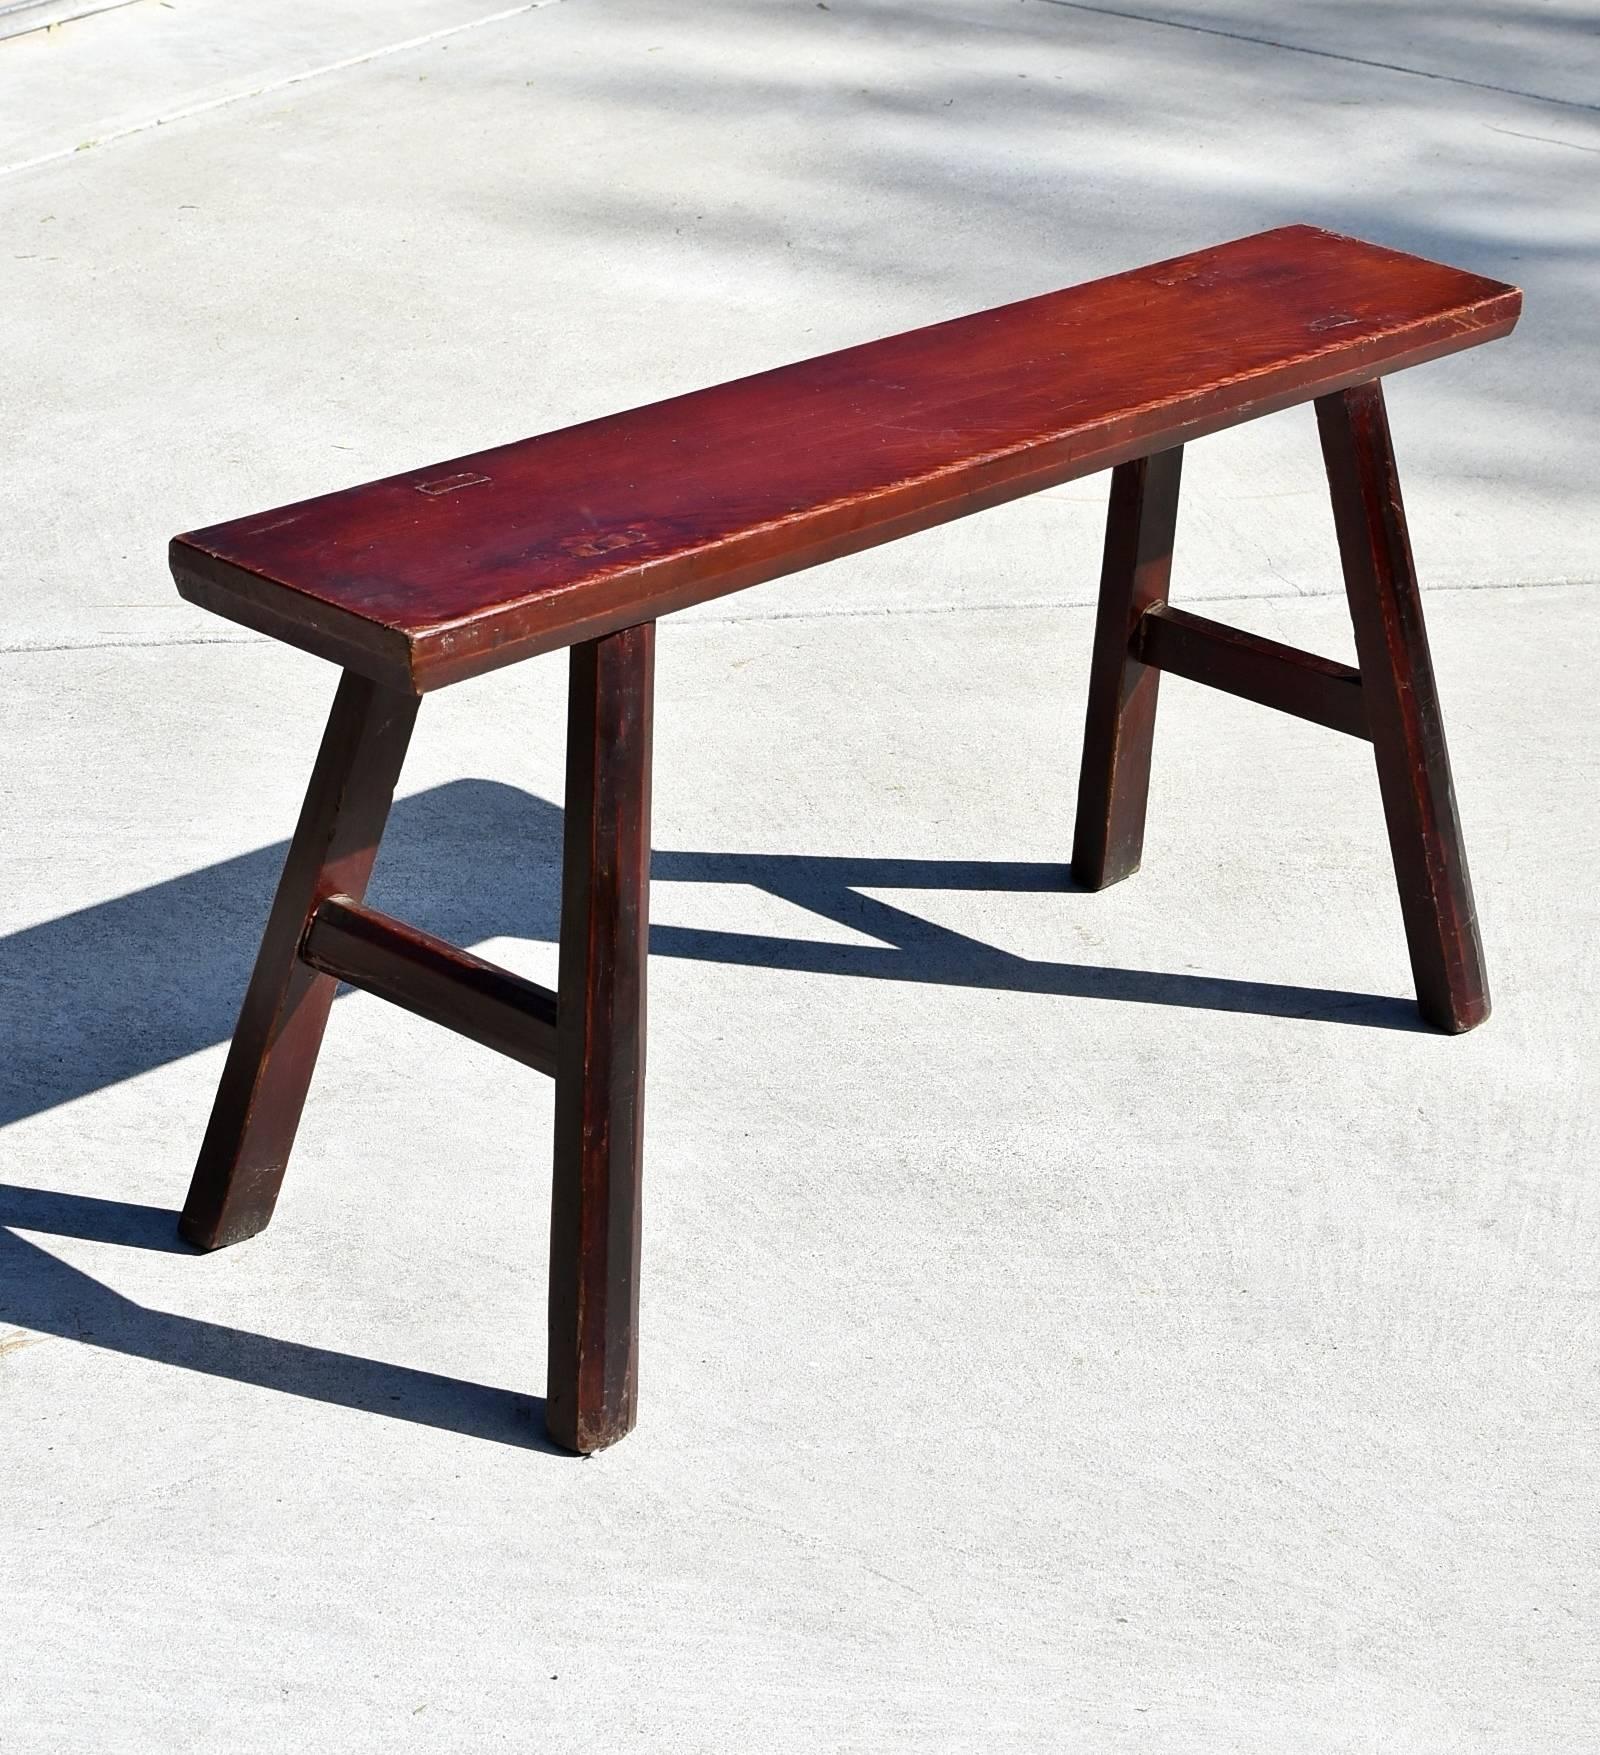 Antique Chinese Bench, Solid Wood, Reddish Brown 3